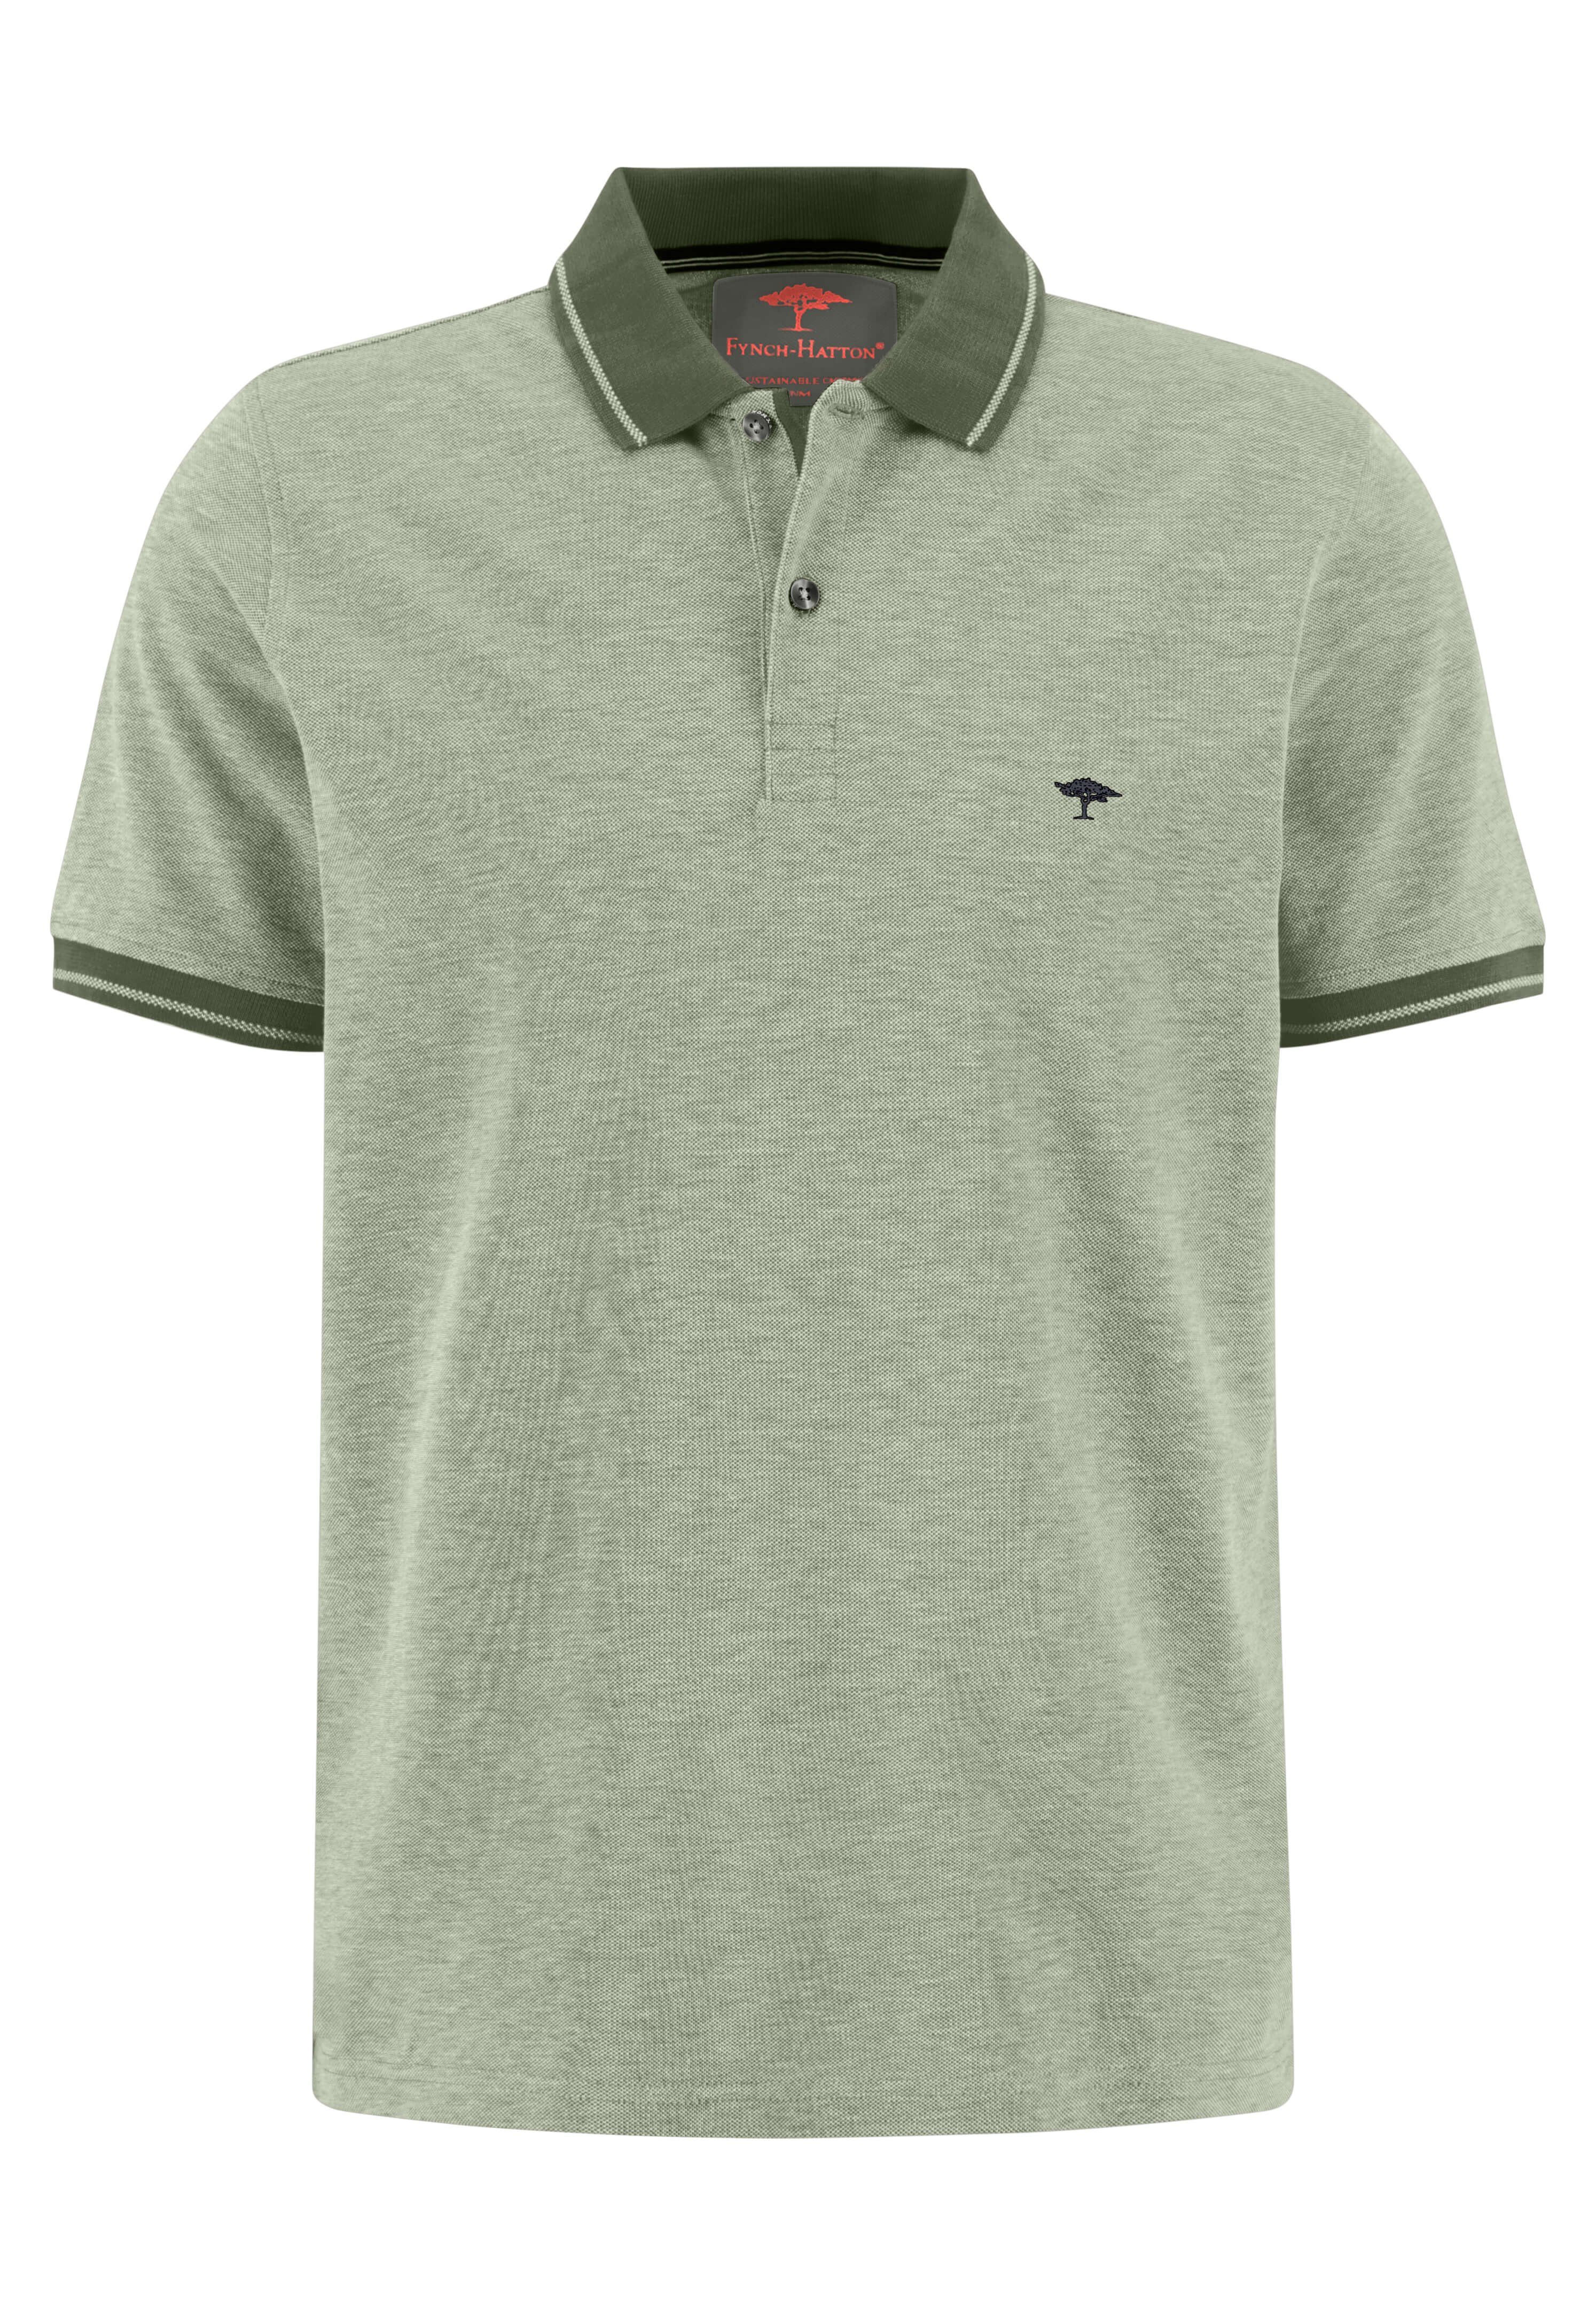 FYNCH-HATTON Poloshirt Polo, Two-Tone dusty olive